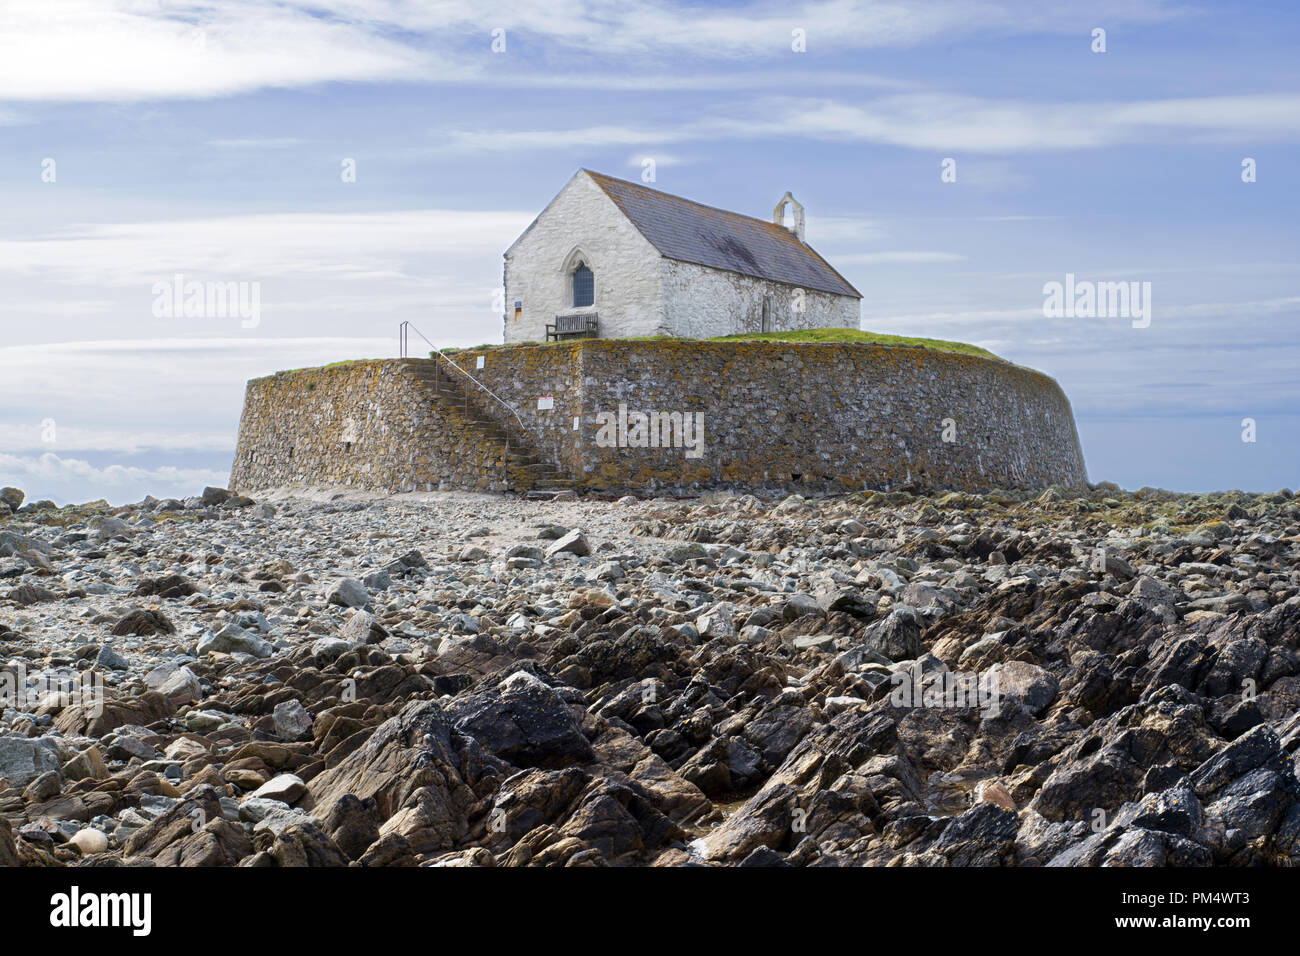 St Cwyfan's, known as Church in the Sea, is located on the small tidal island of Cribinau near Aberffraw, Anglesey. It dates from the 12th century. Stock Photo